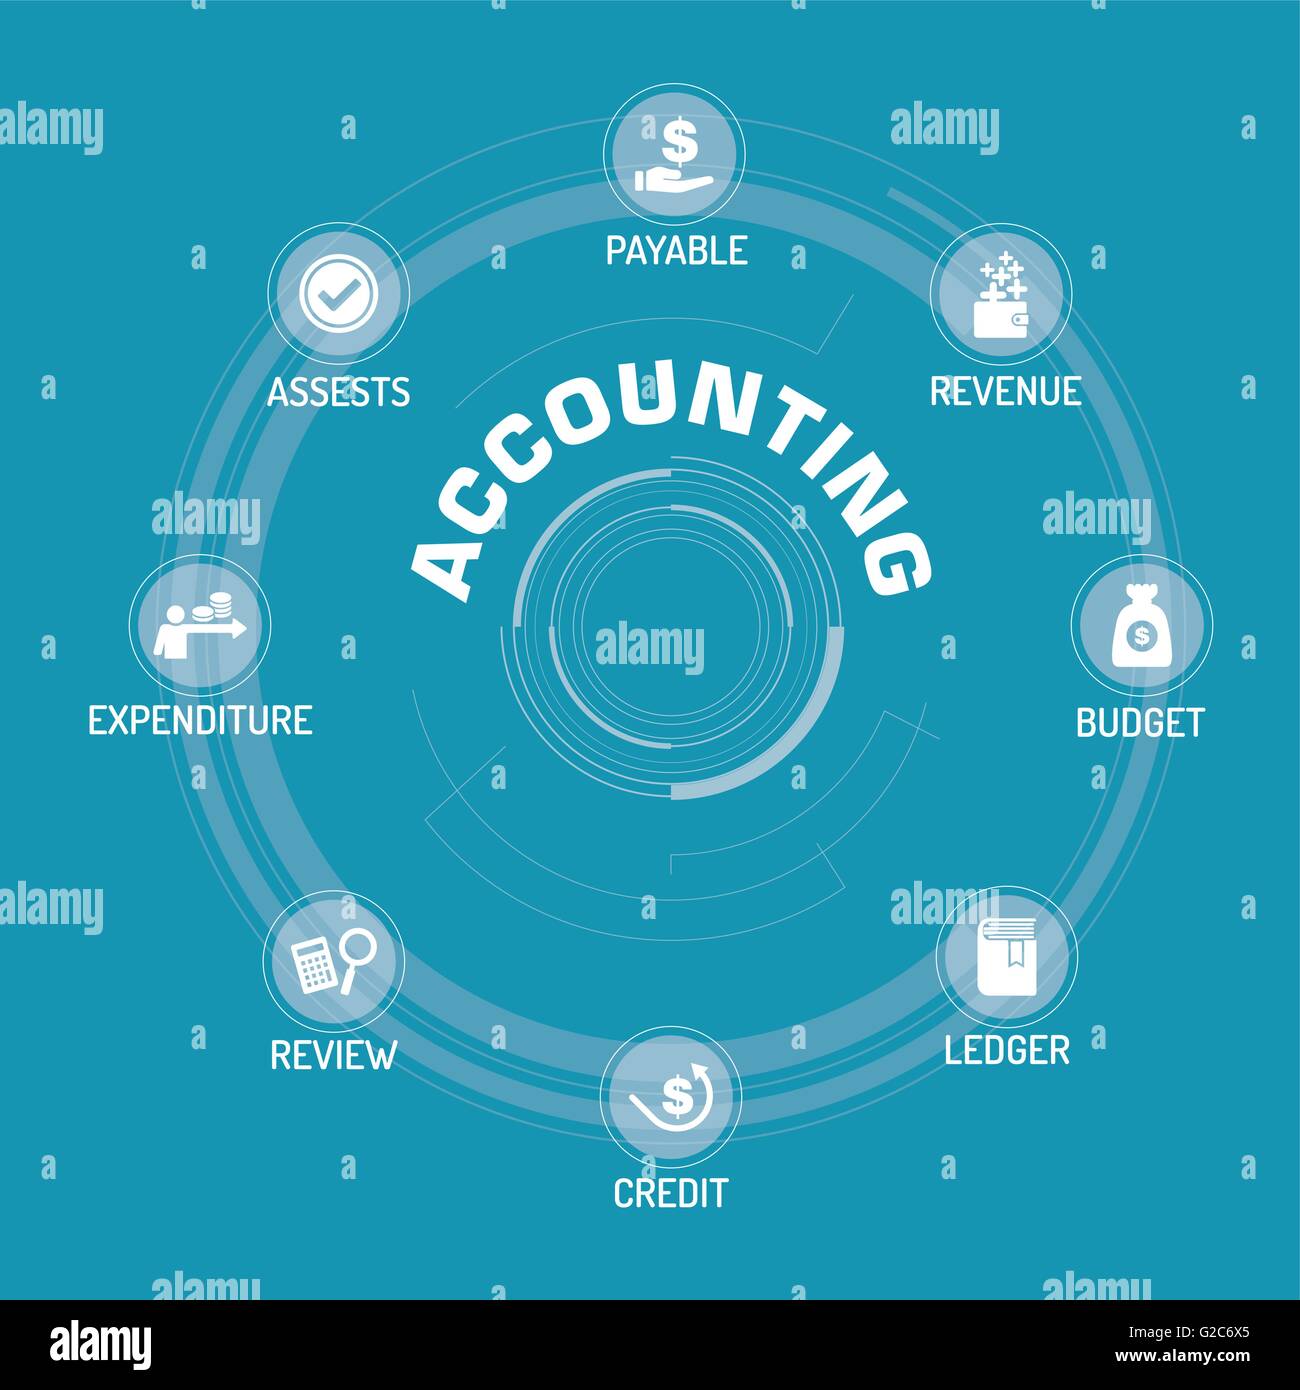 ACCOUNTING ICON SET ON BLUE BACKGROUND Stock Vector